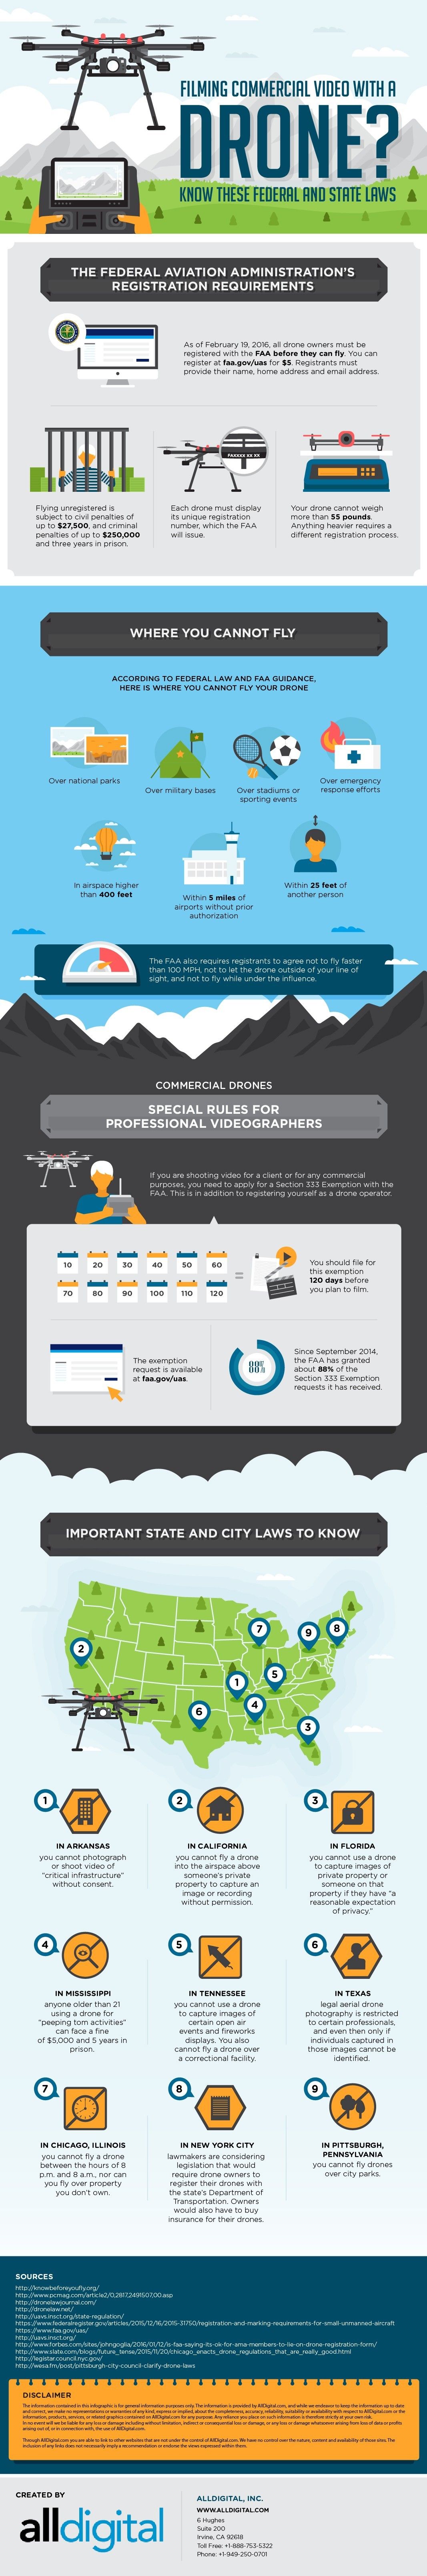 Drone shooting laws infographic